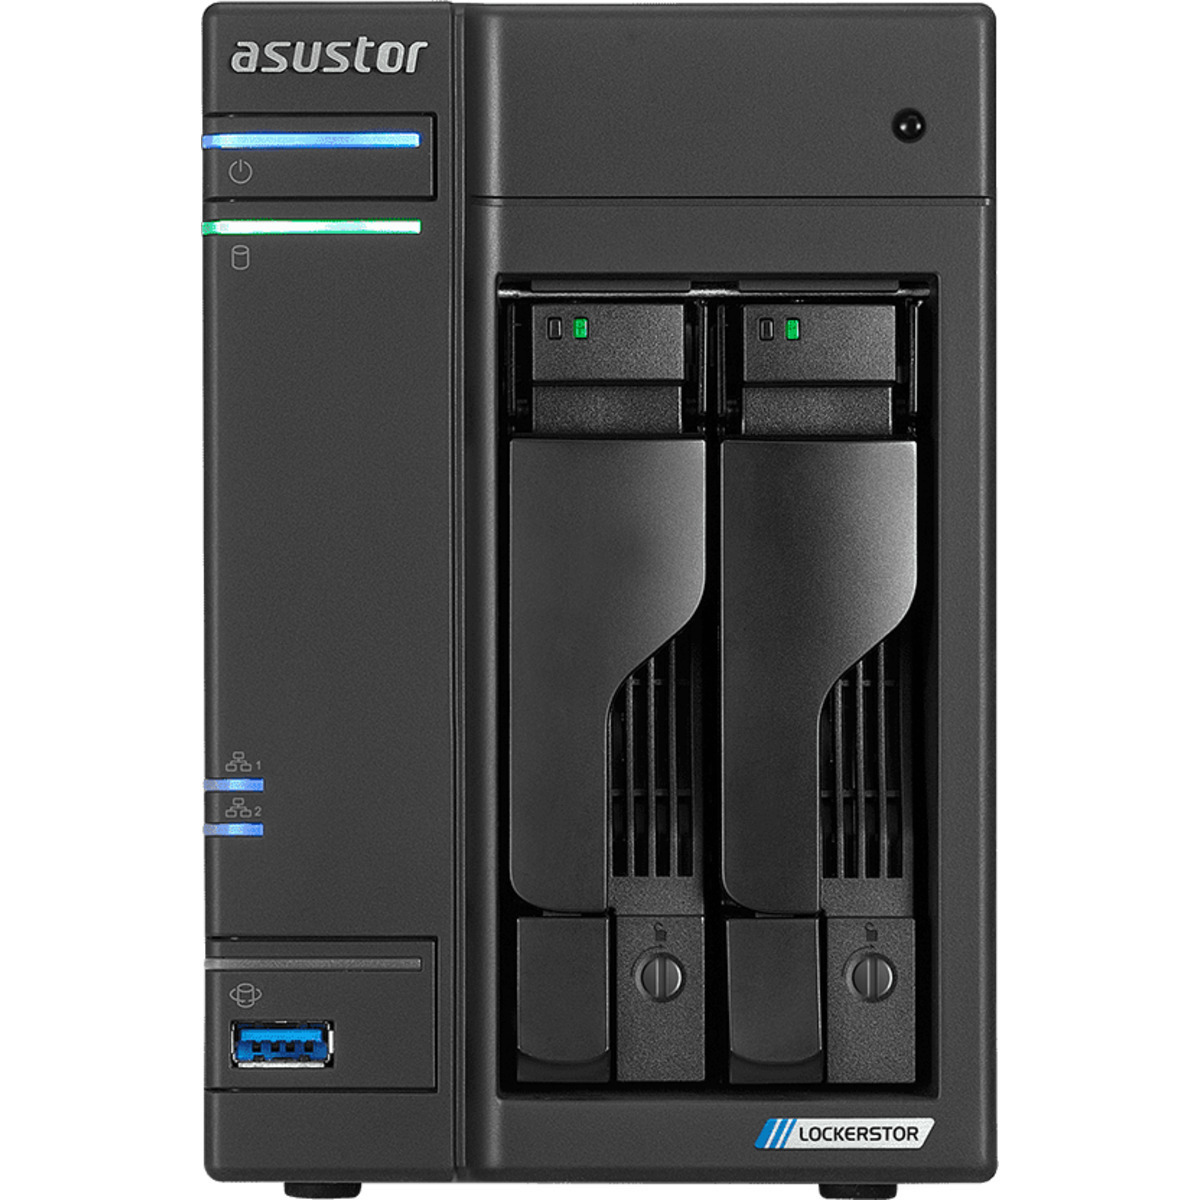 ASUSTOR AS6602T Lockerstor 2 28tb 2-Bay Desktop Multimedia / Power User / Business NAS - Network Attached Storage Device 2x14tb Seagate EXOS X18 ST14000NM000J 3.5 7200rpm SATA 6Gb/s HDD ENTERPRISE Class Drives Installed - Burn-In Tested - FREE RAM UPGRADE AS6602T Lockerstor 2